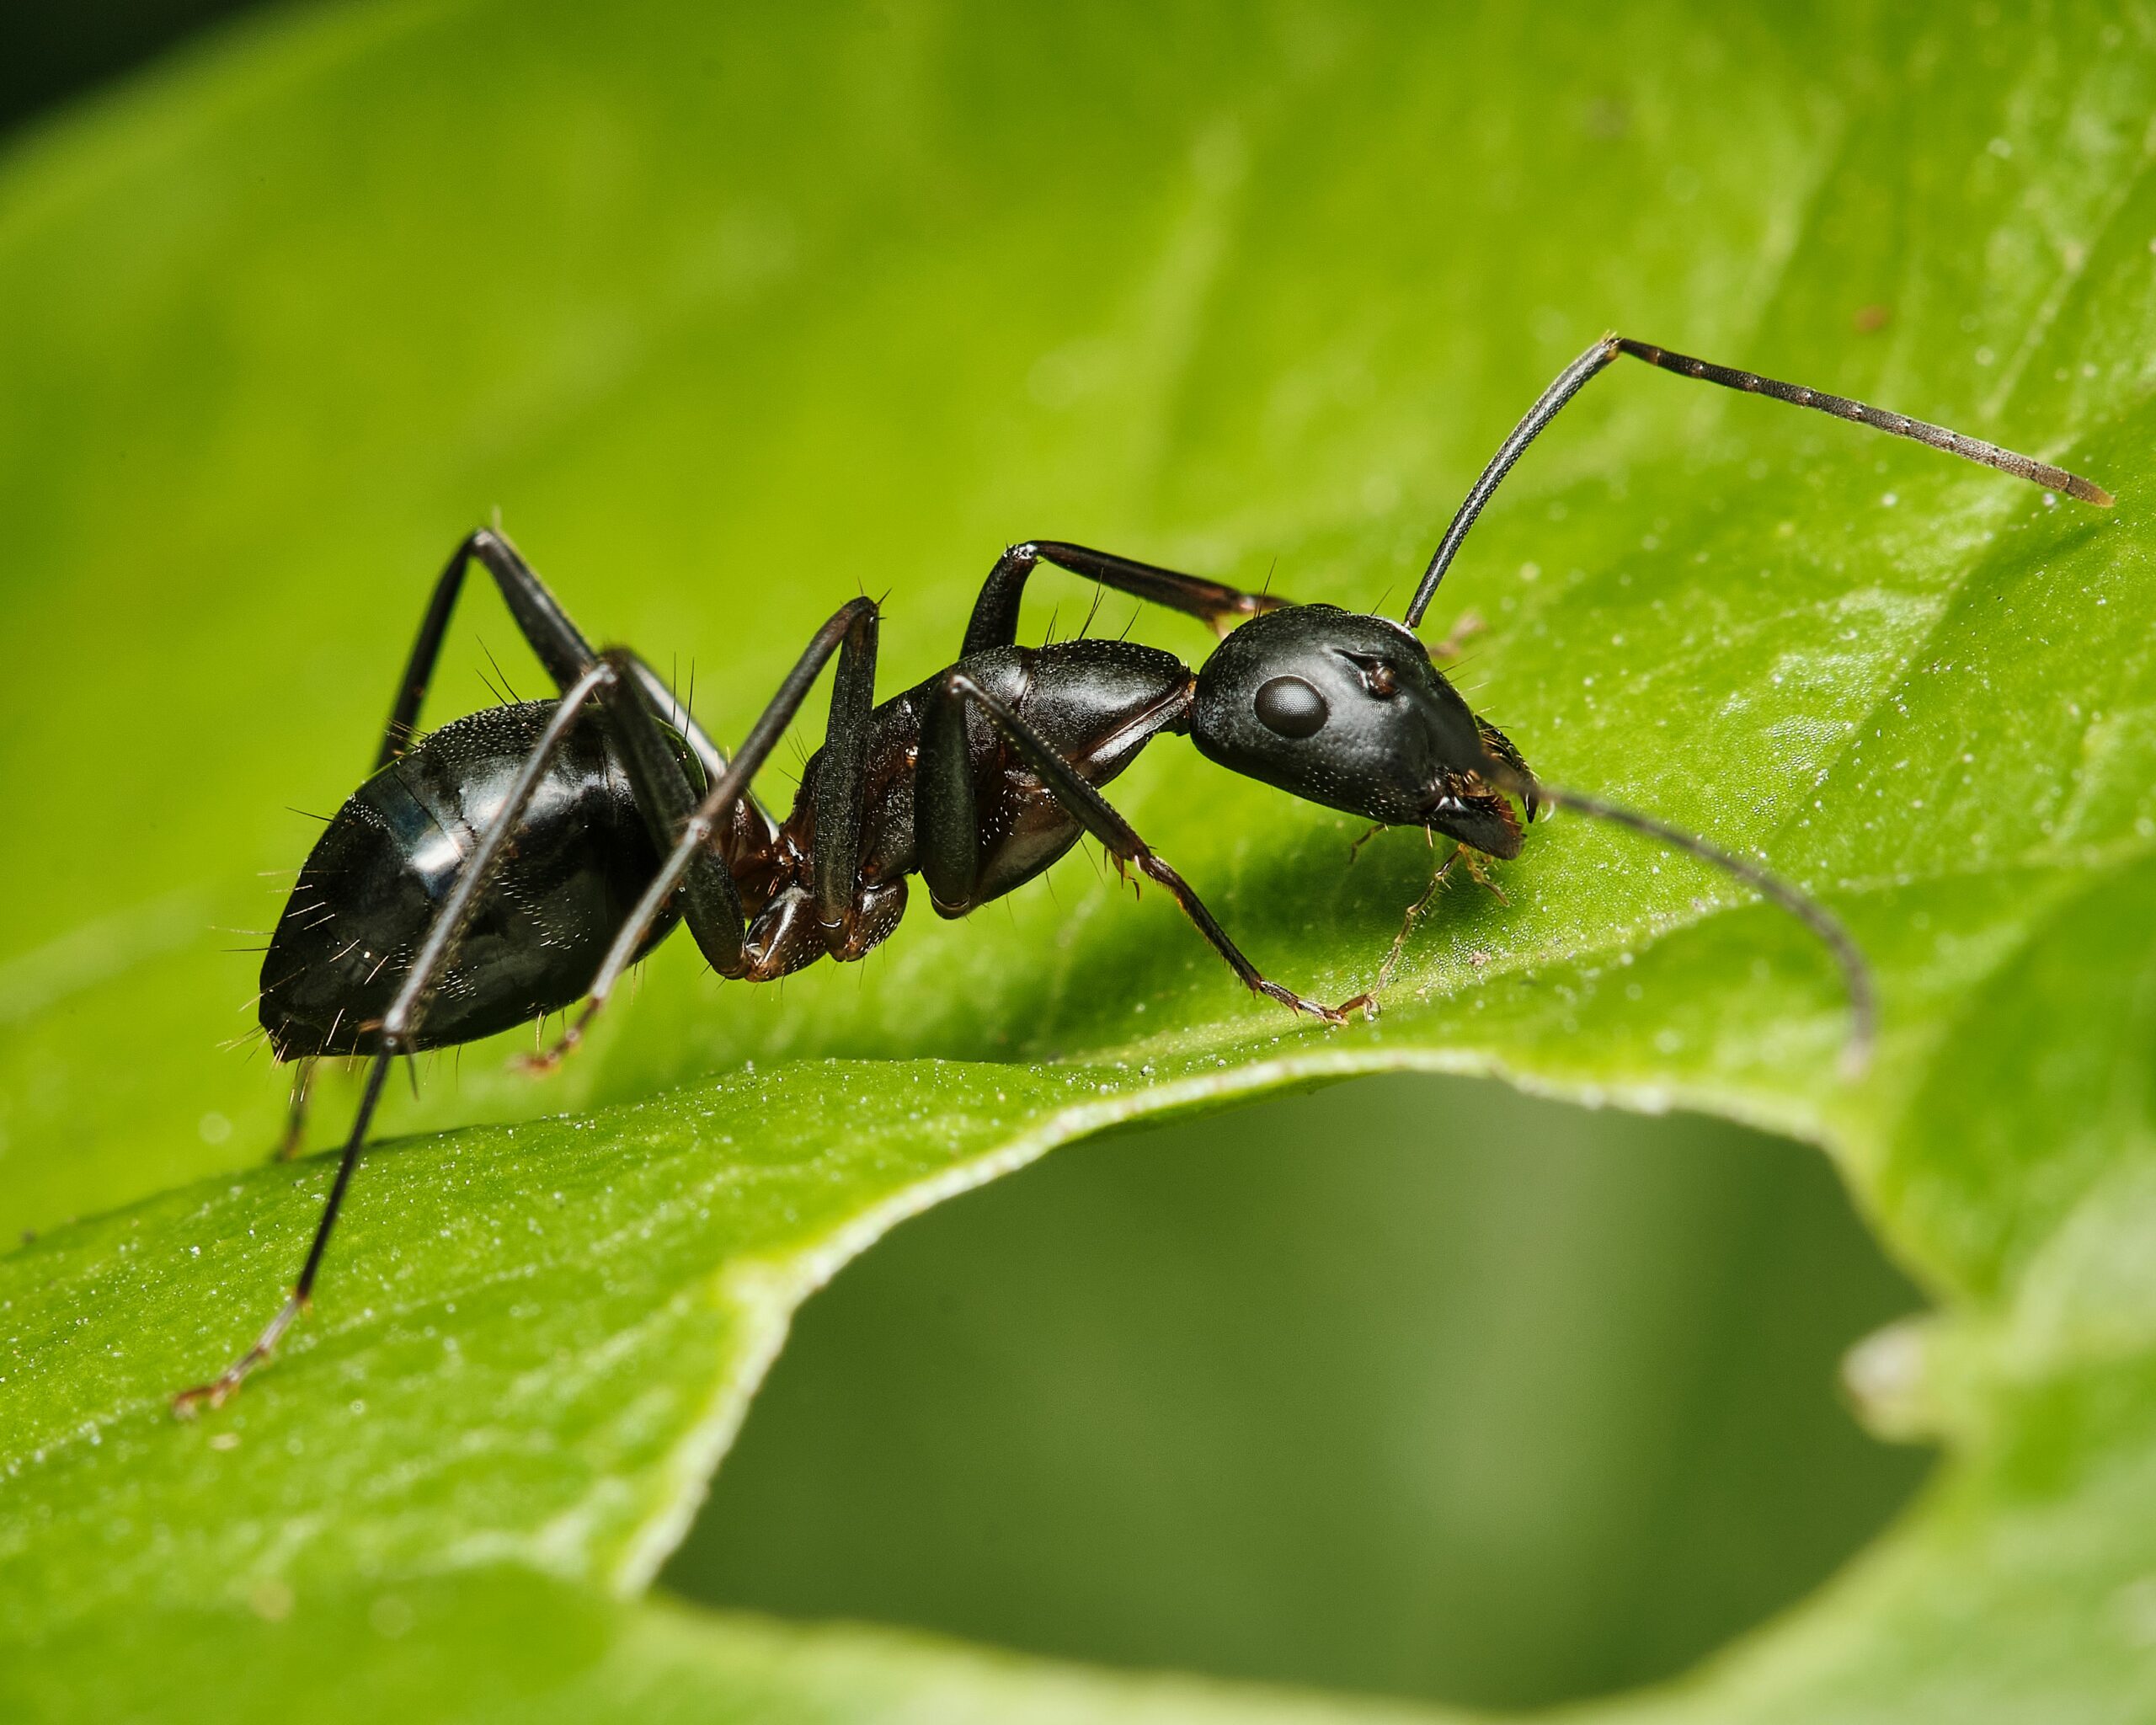 high-resolution-image-of-an-ant-camponotus-compres-min